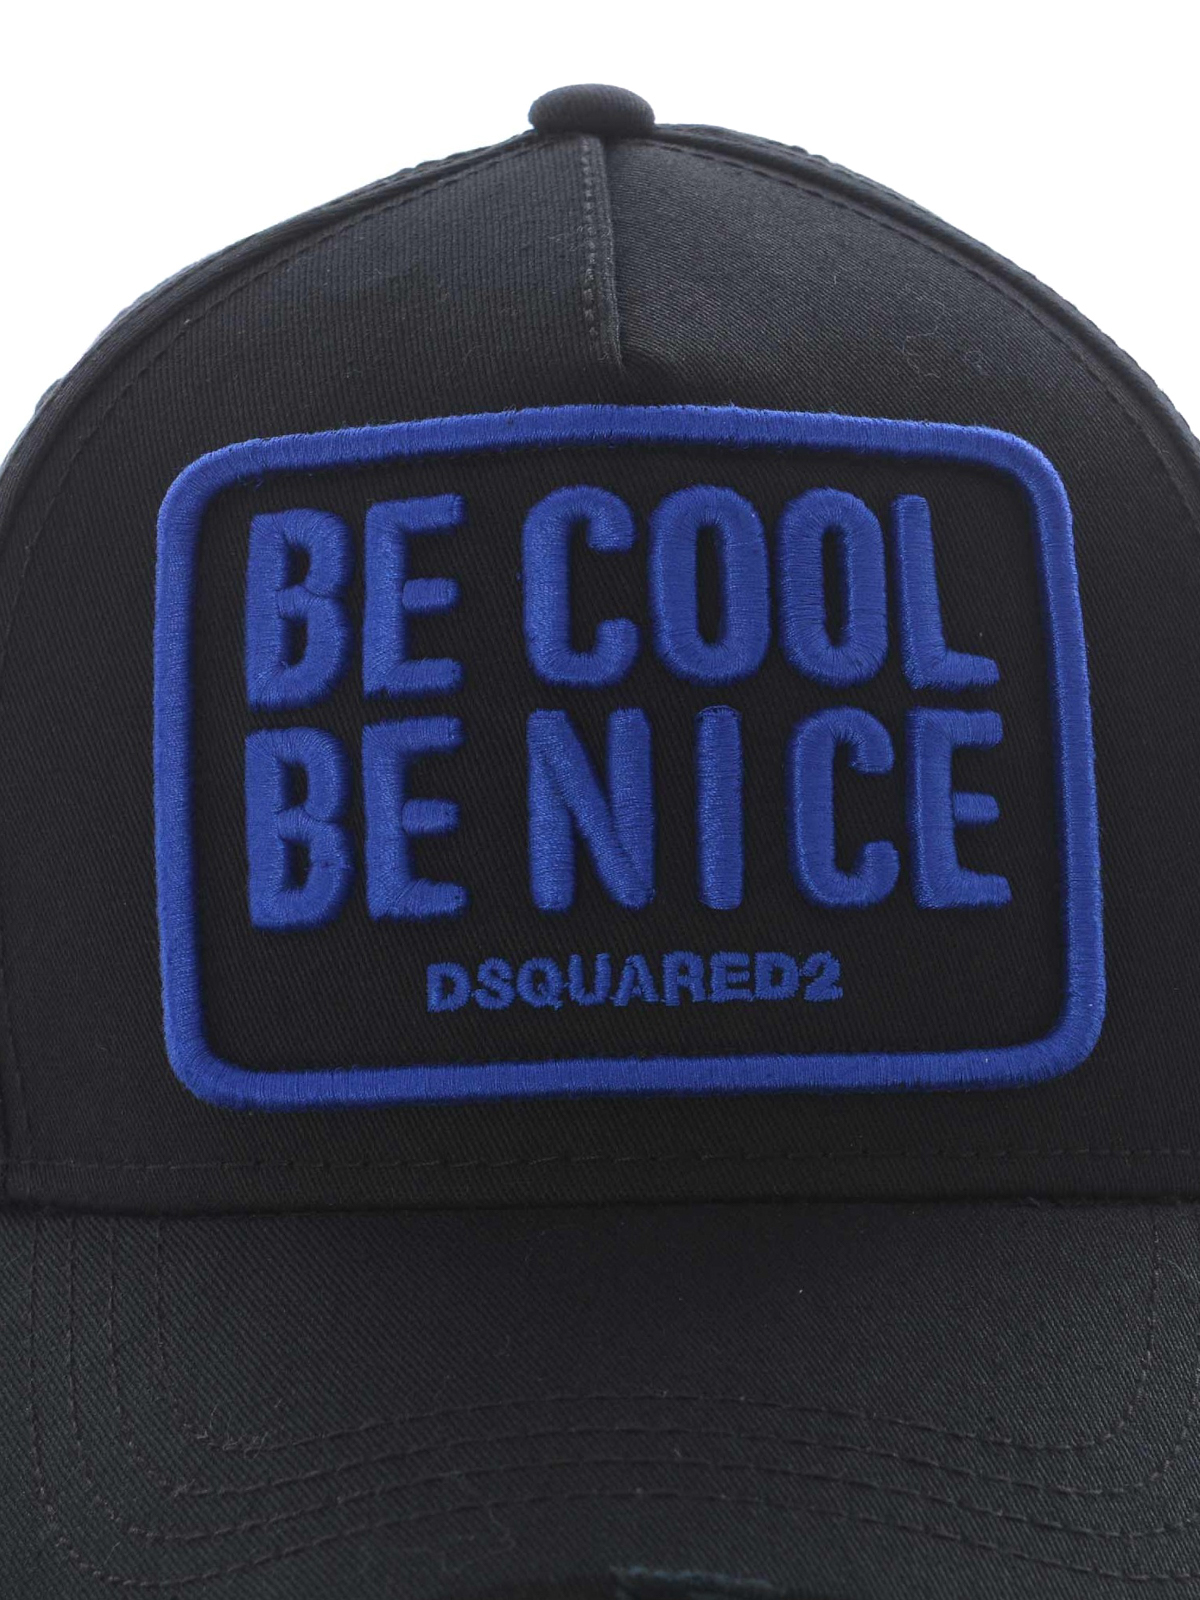 dsquared be cool be nice cap